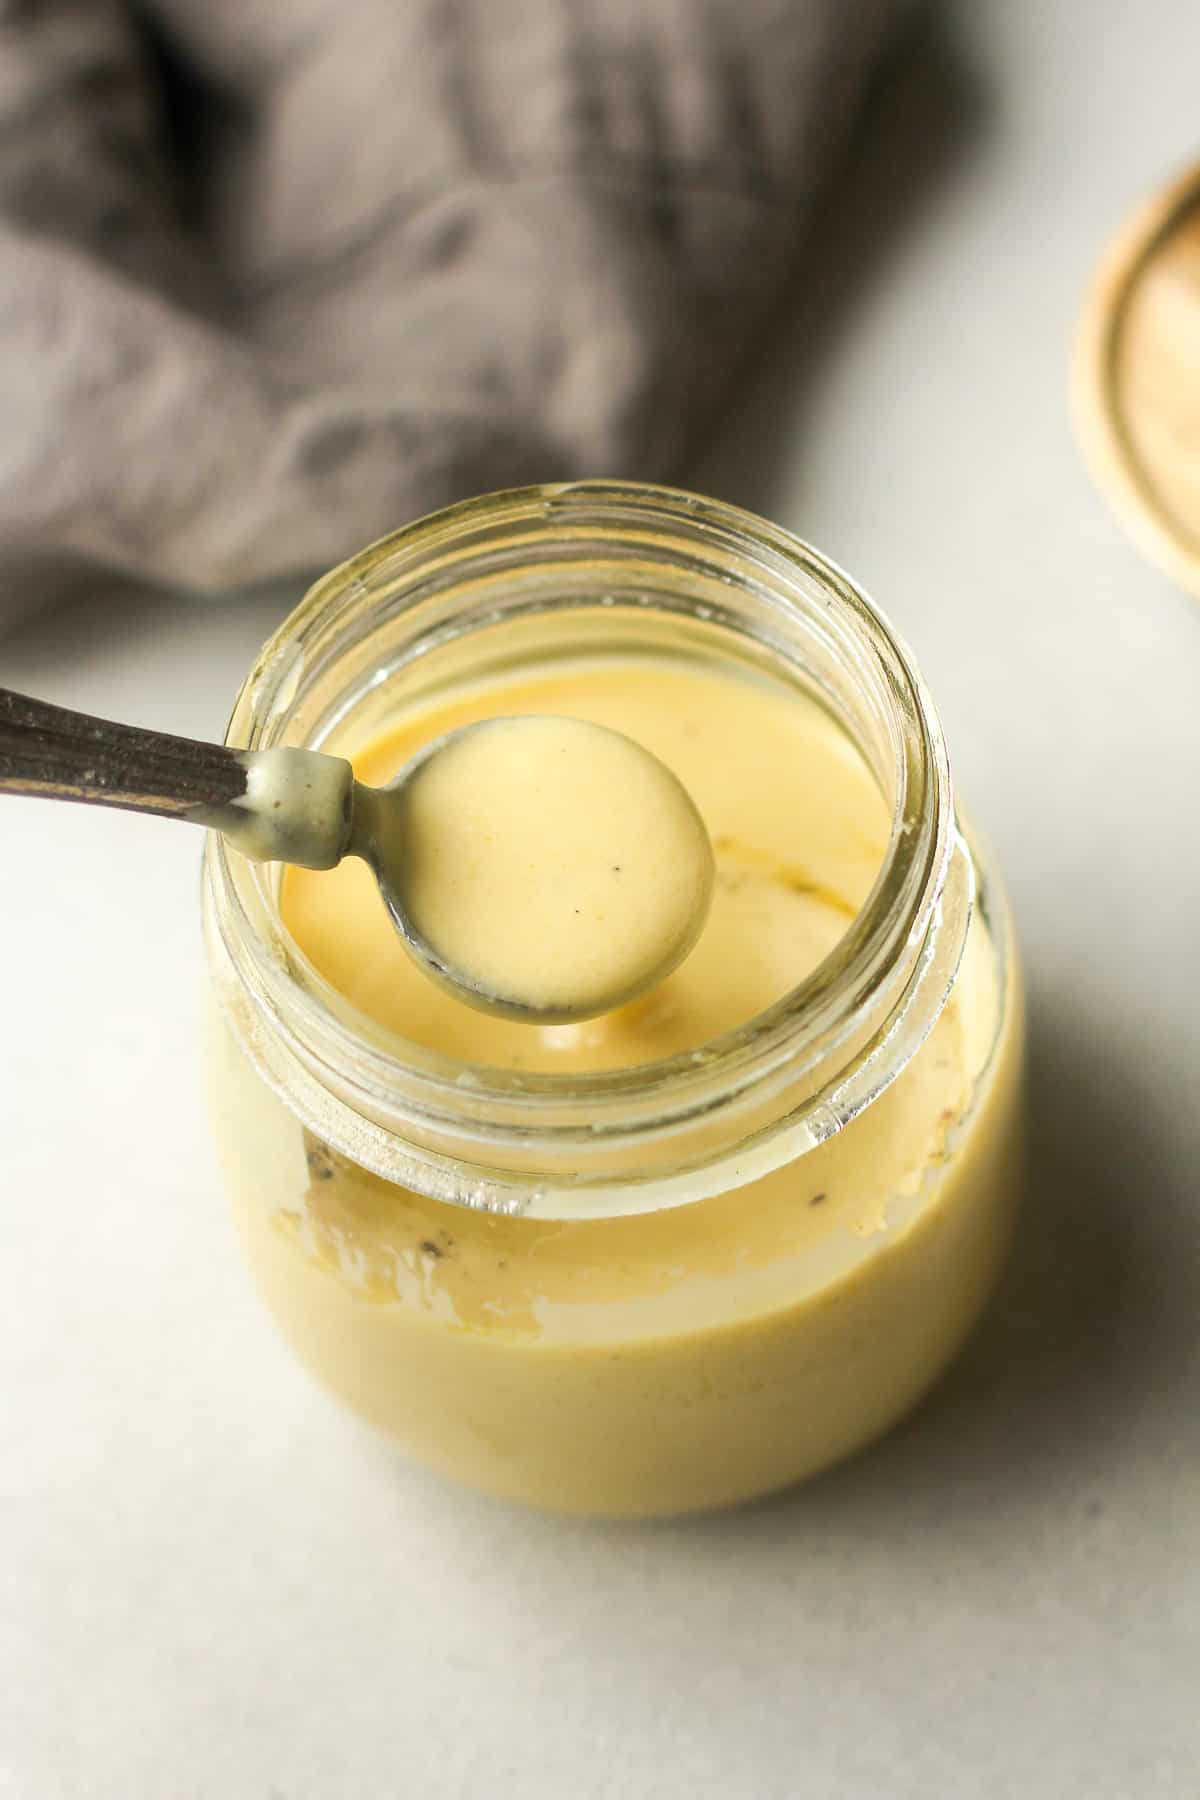 A teaspoon lifting out some dressing from a jar.